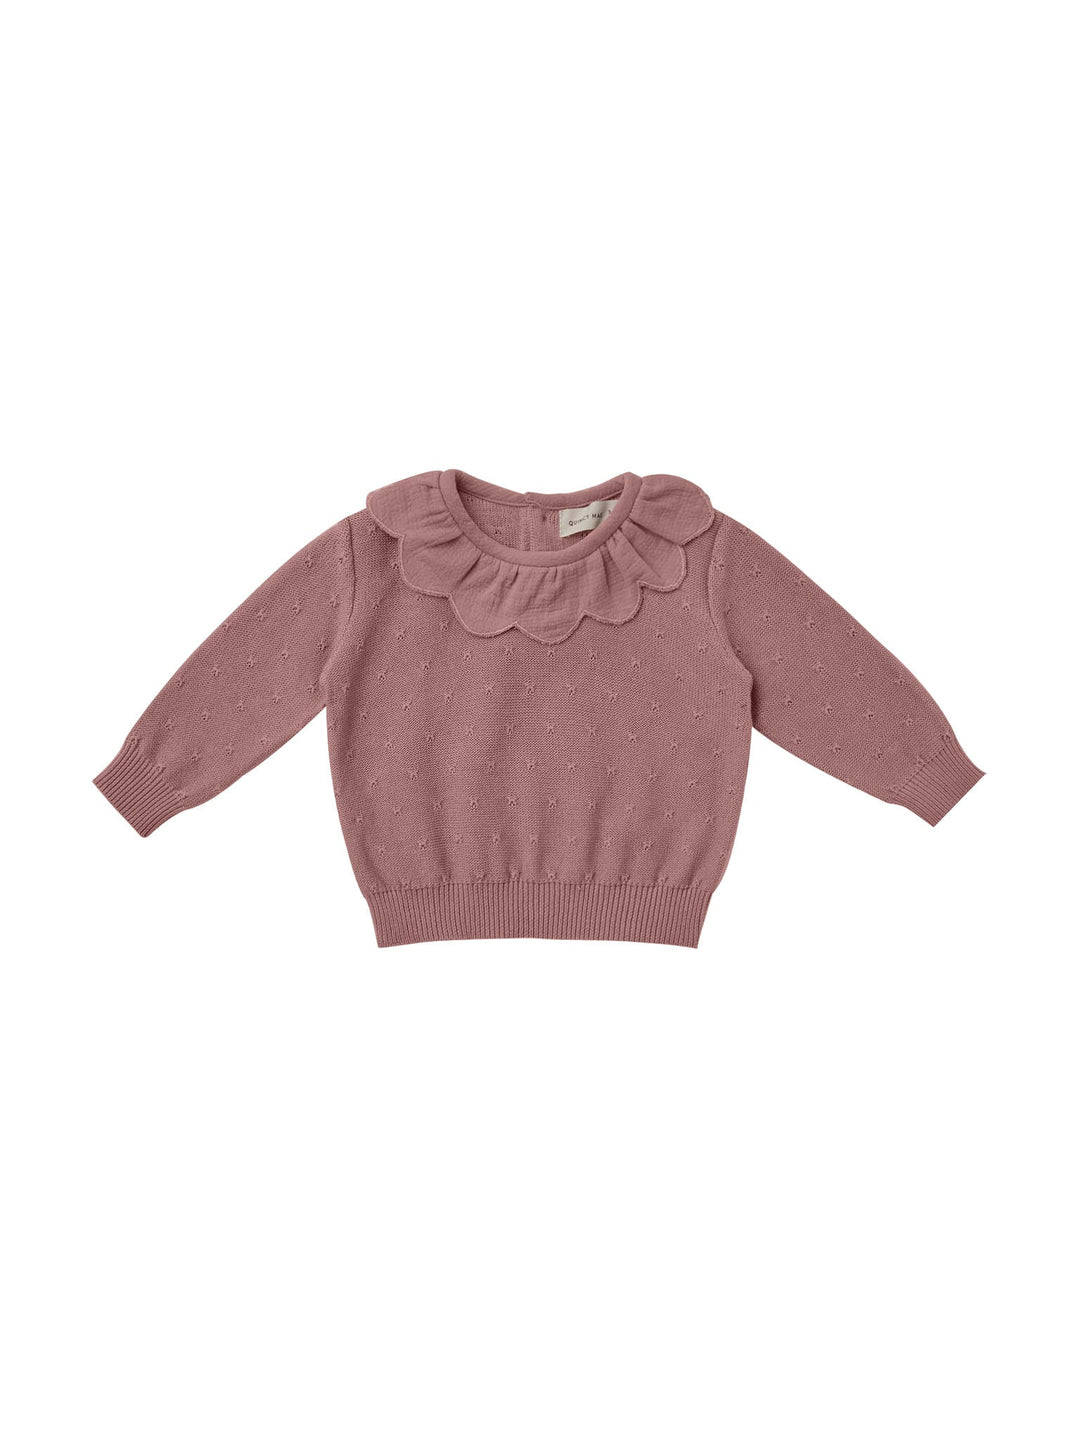 Quincy Mae Sweater Petal Knit Sweater - Fig